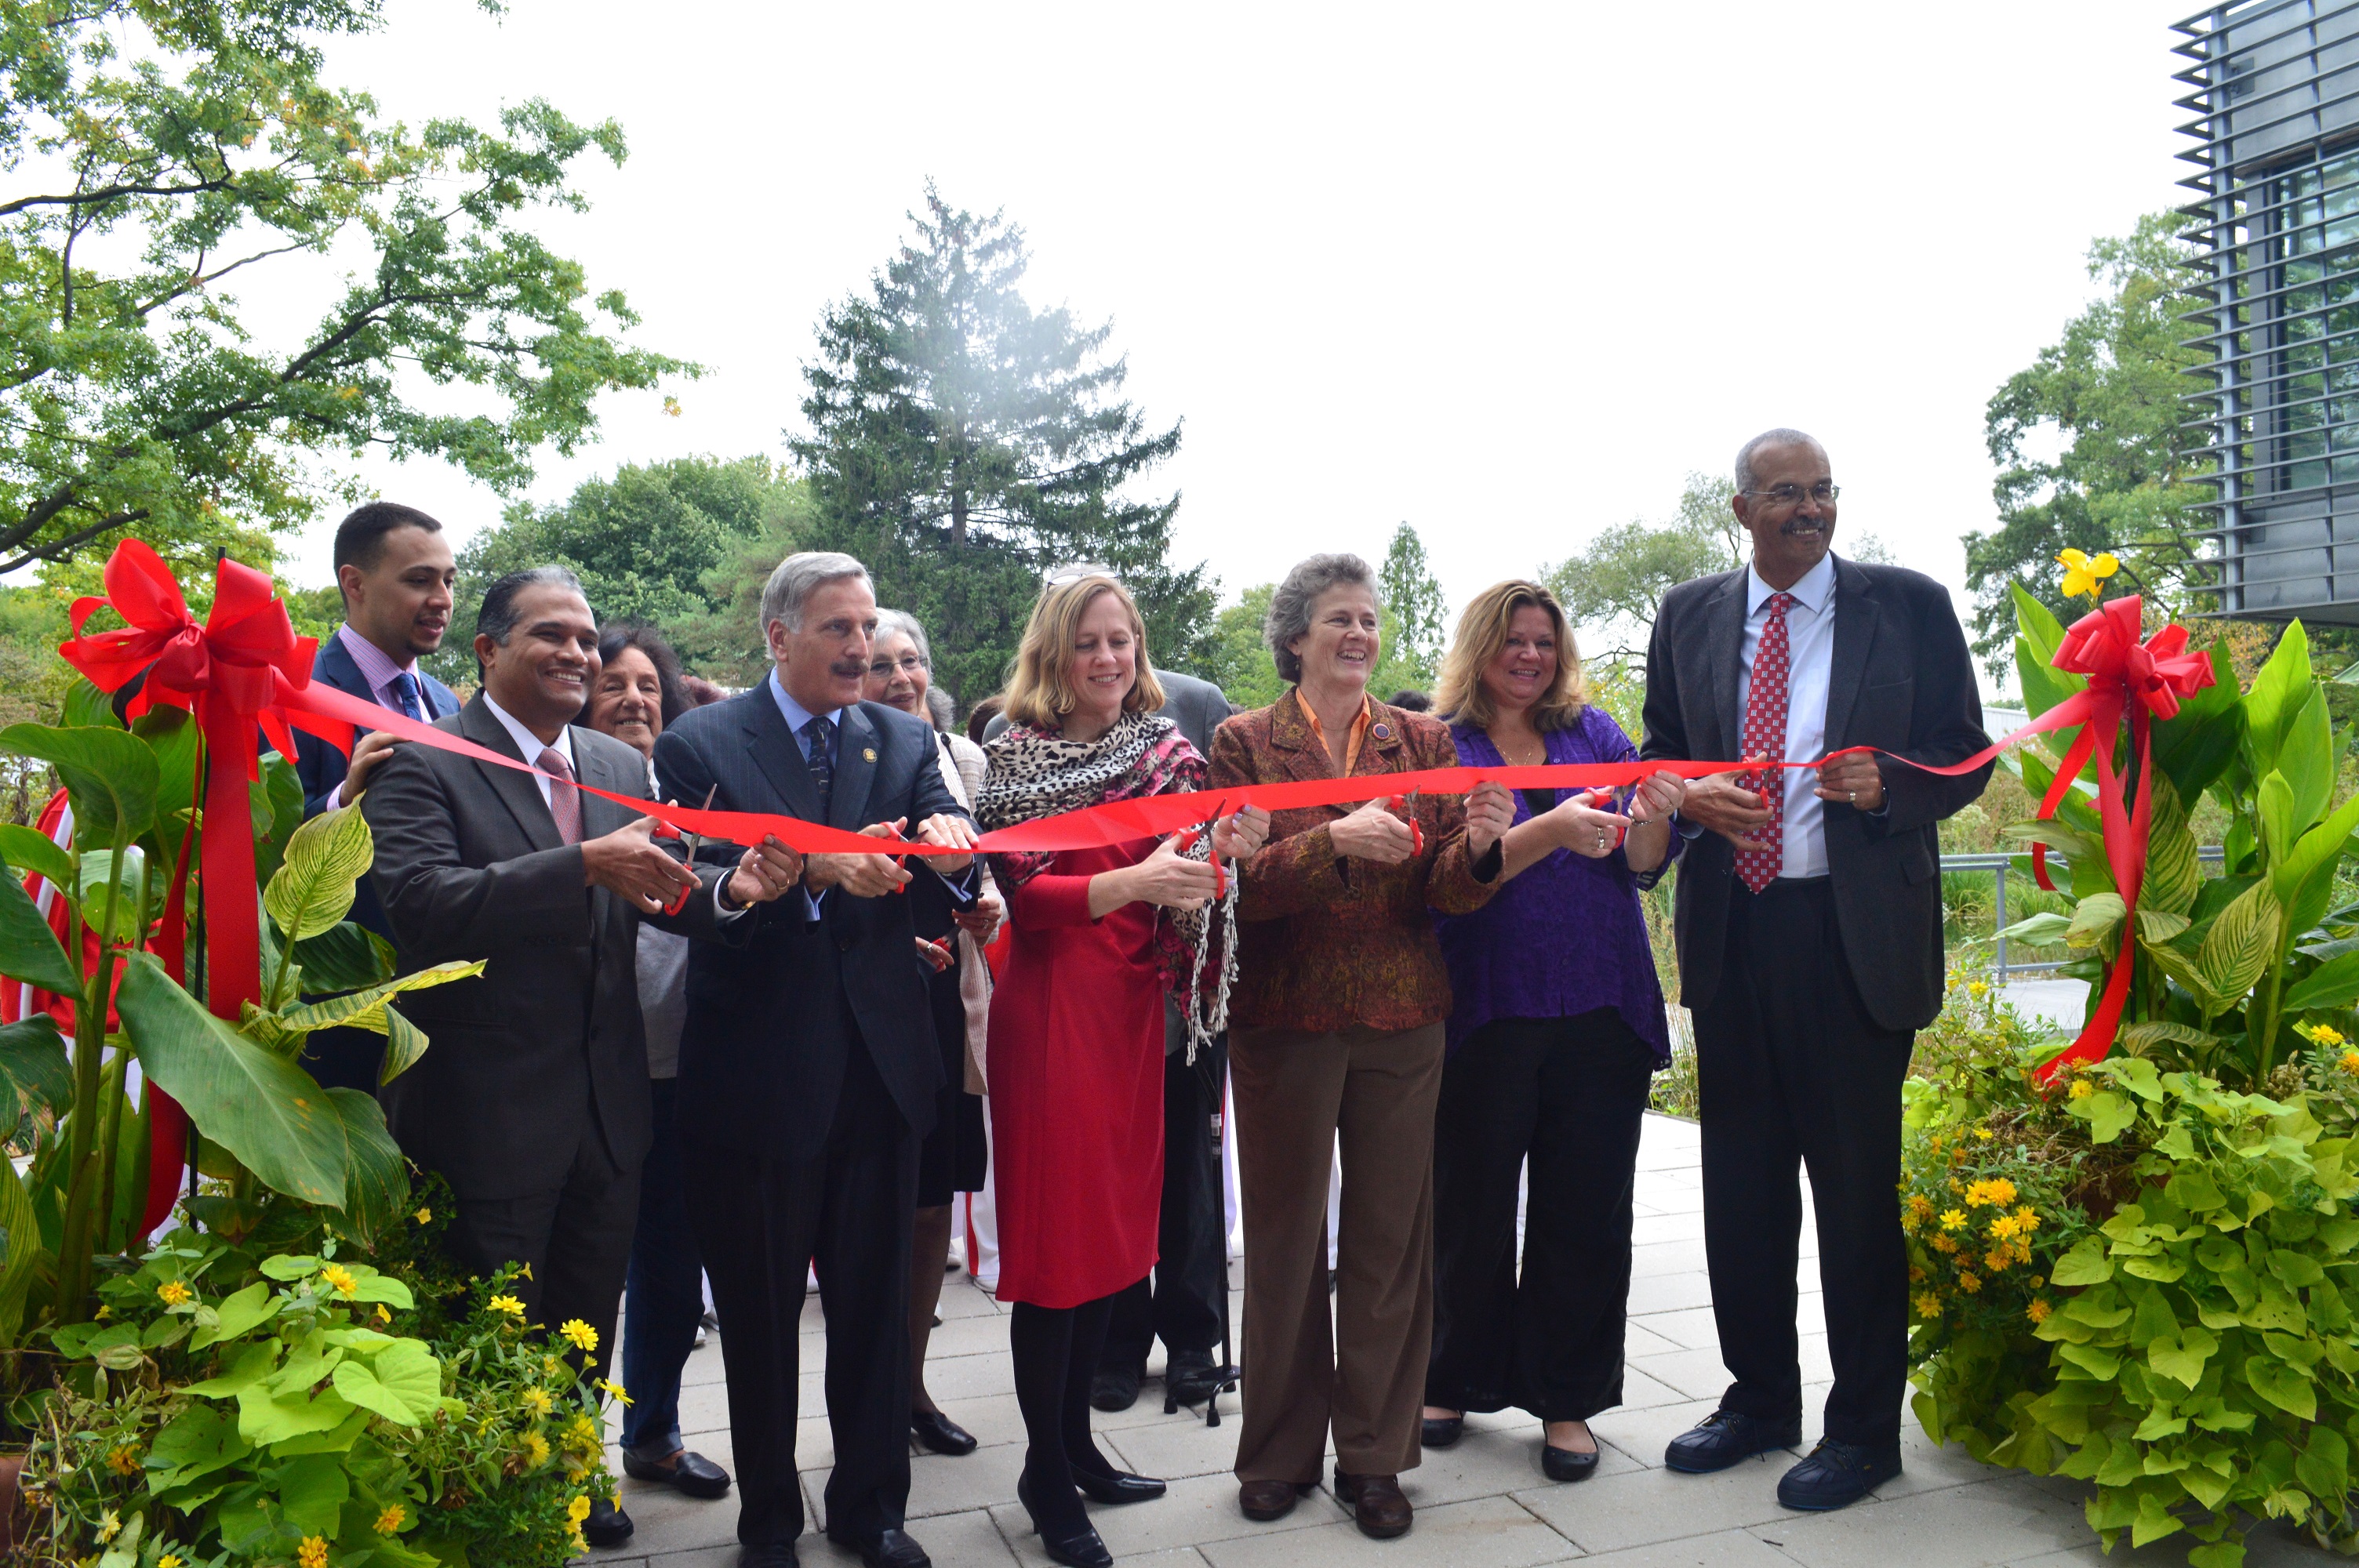 A ceremonial ribbon cutting of the new walkways in the Queens Botanical Garden.